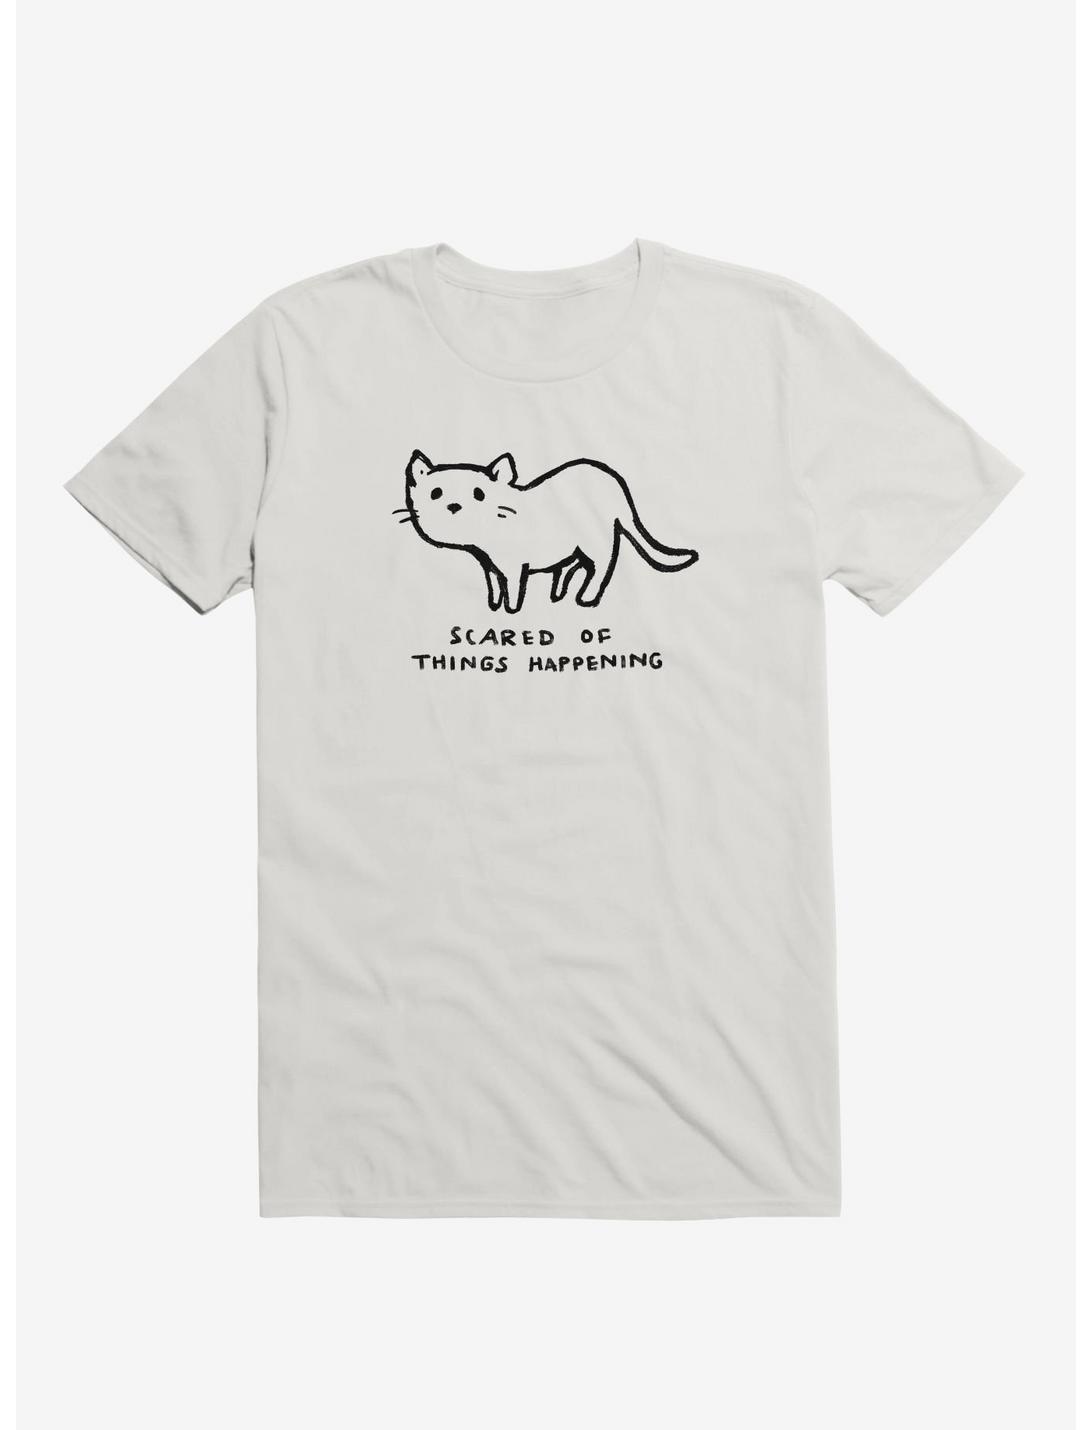 Scared Of Things Happening T-Shirt, WHITE, hi-res